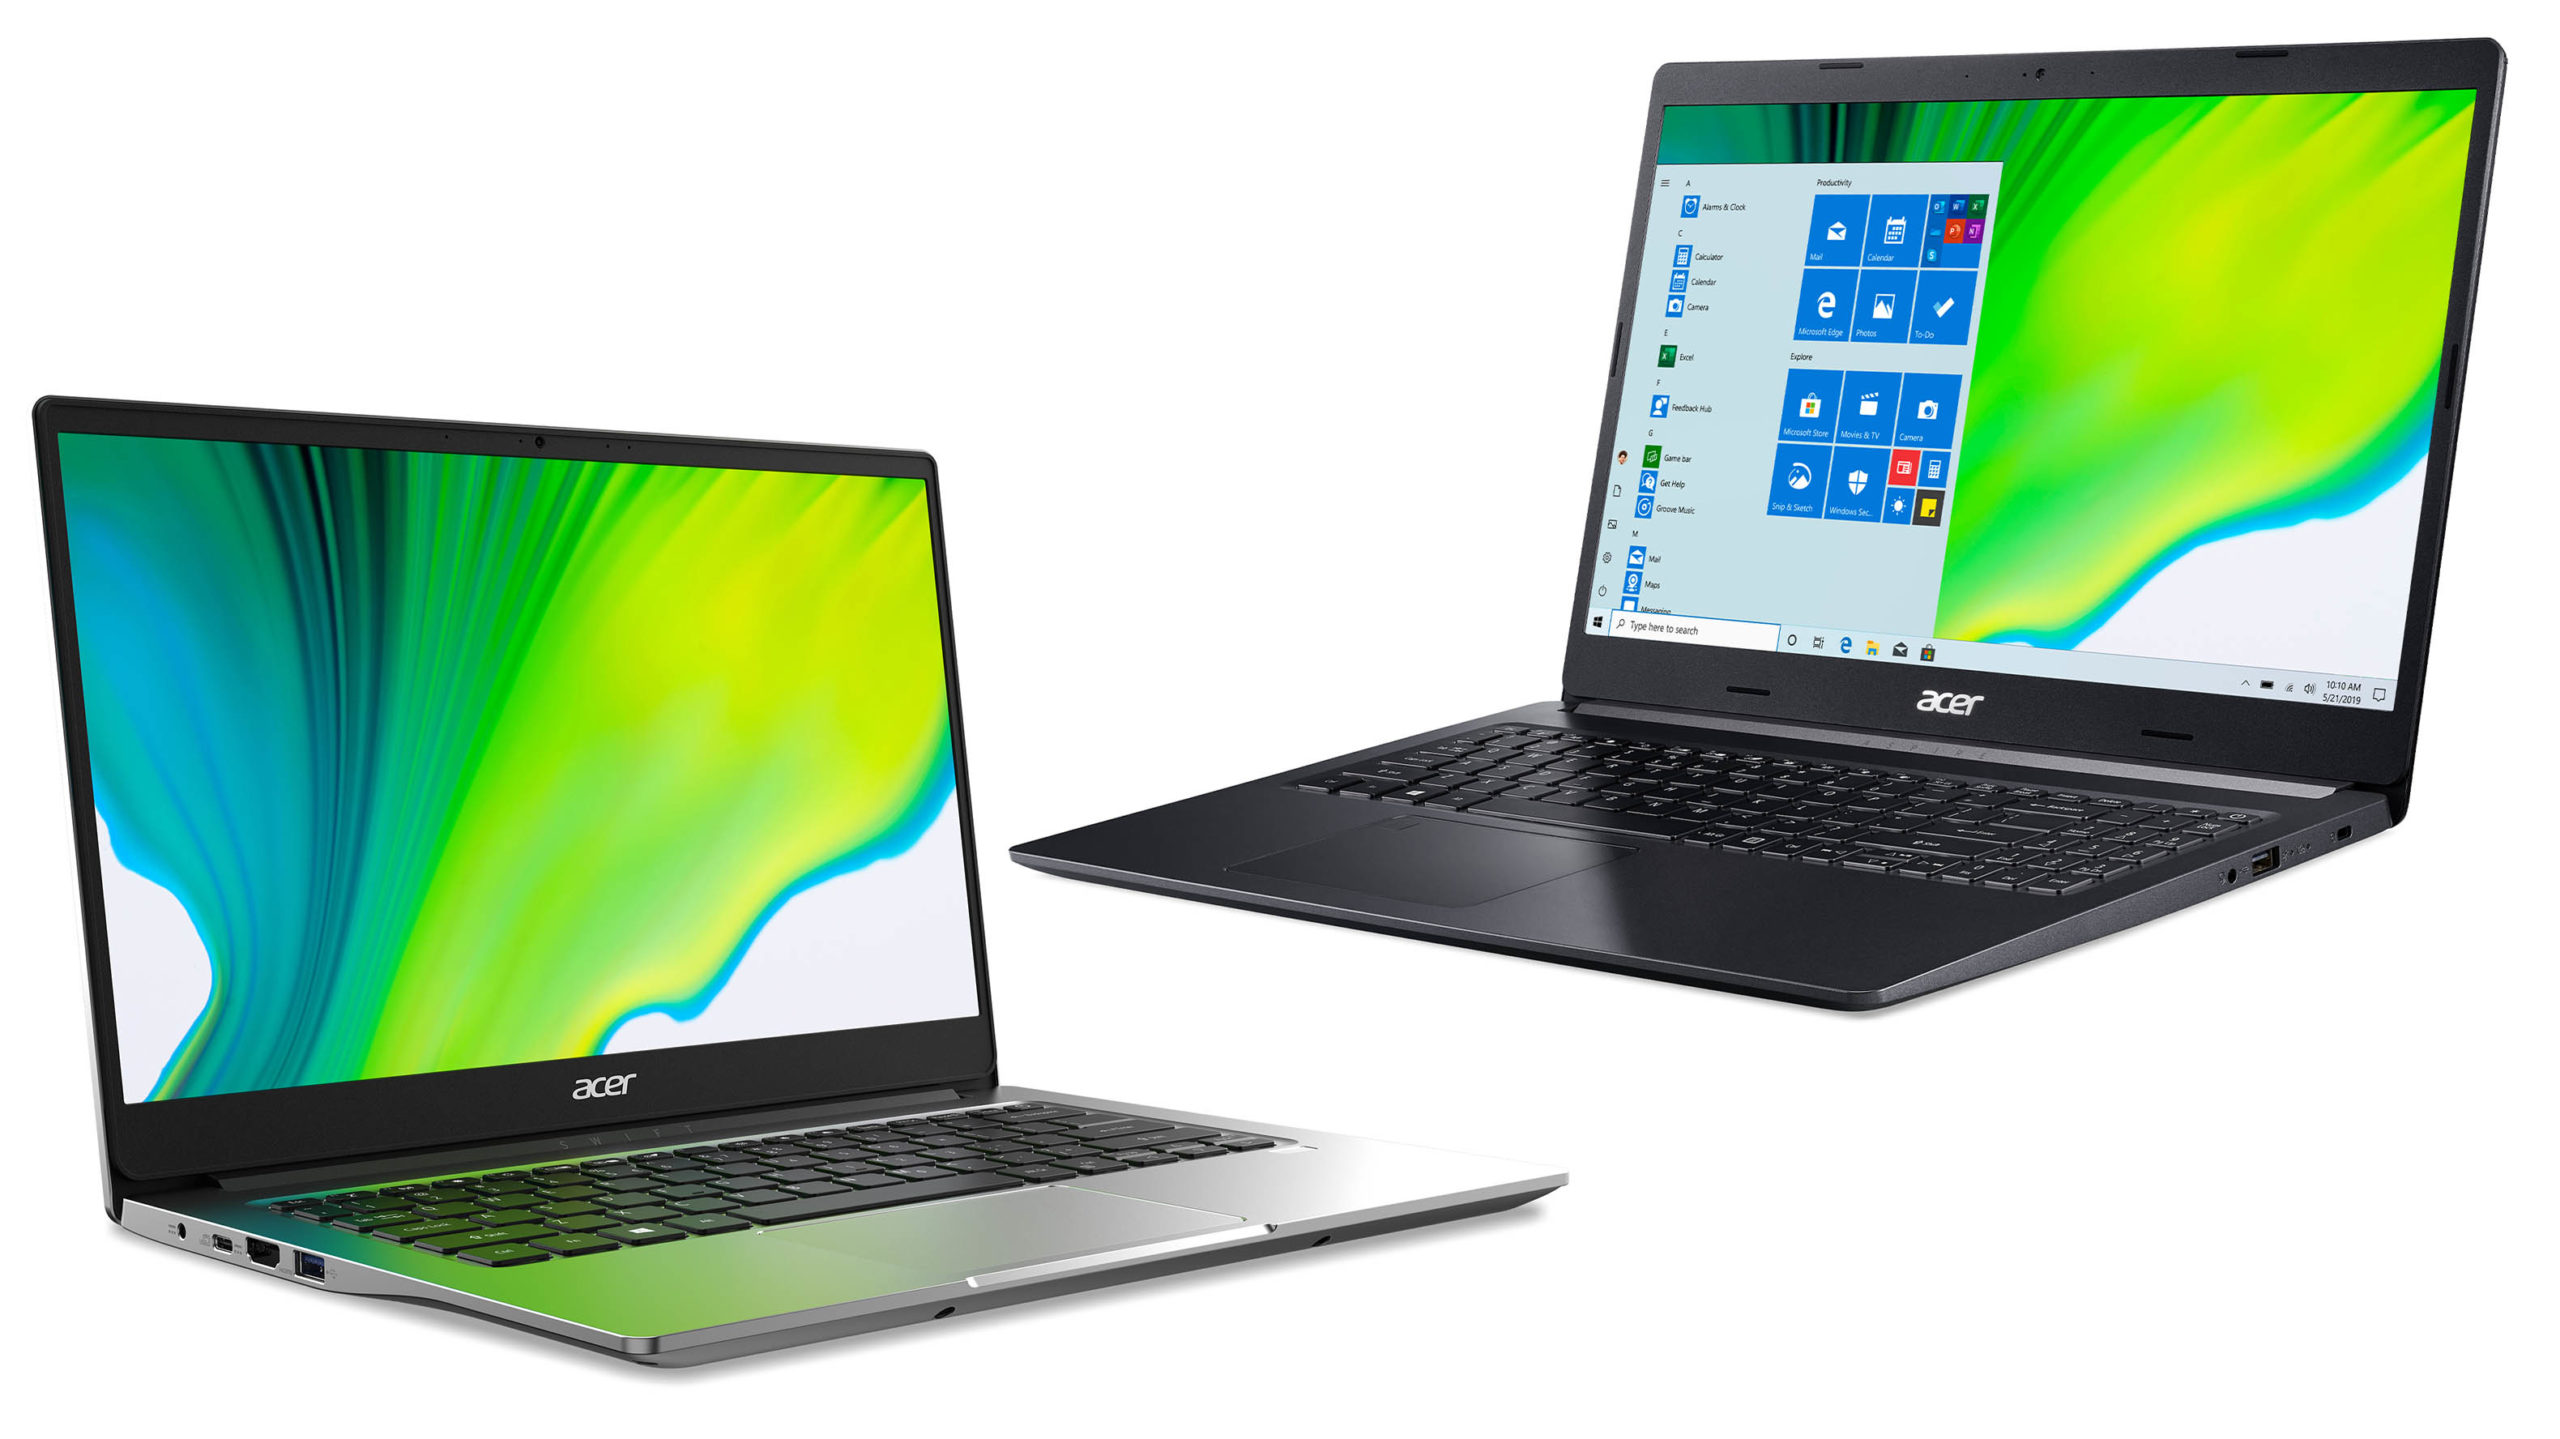 Acer Swift 3 and Aspire 5